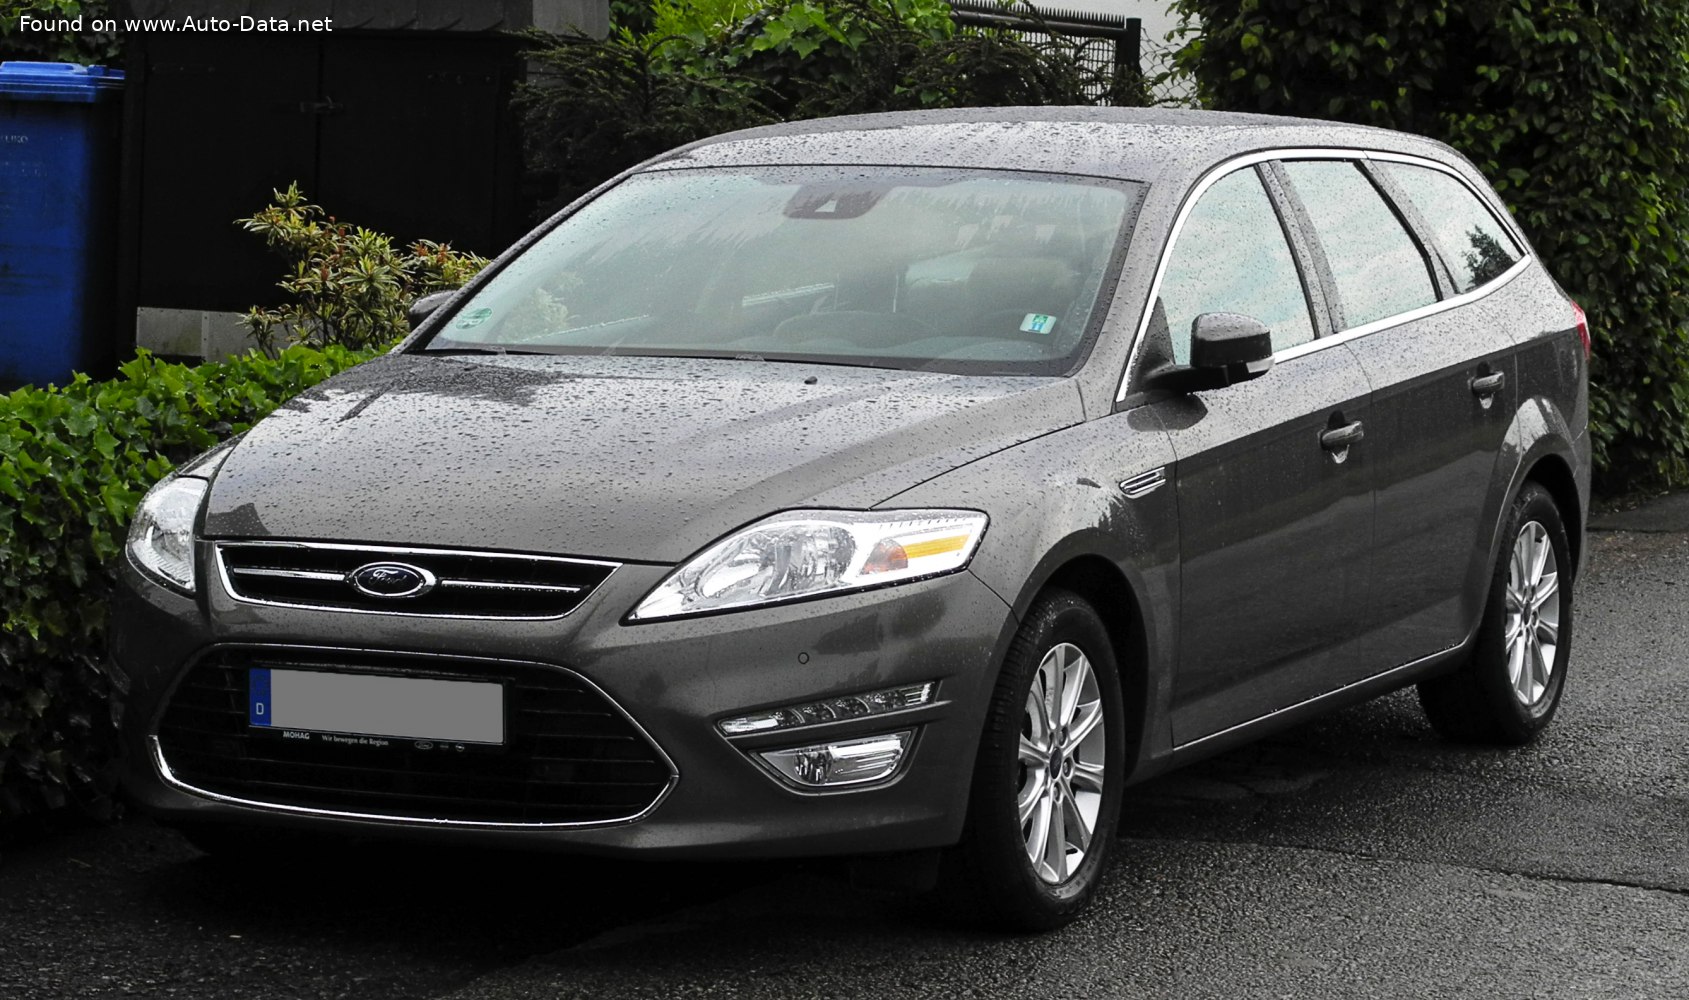 2010 Ford Mondeo III Wagon (facelift 2010) 2.0 TDCI (163 PS) Duratorq ...